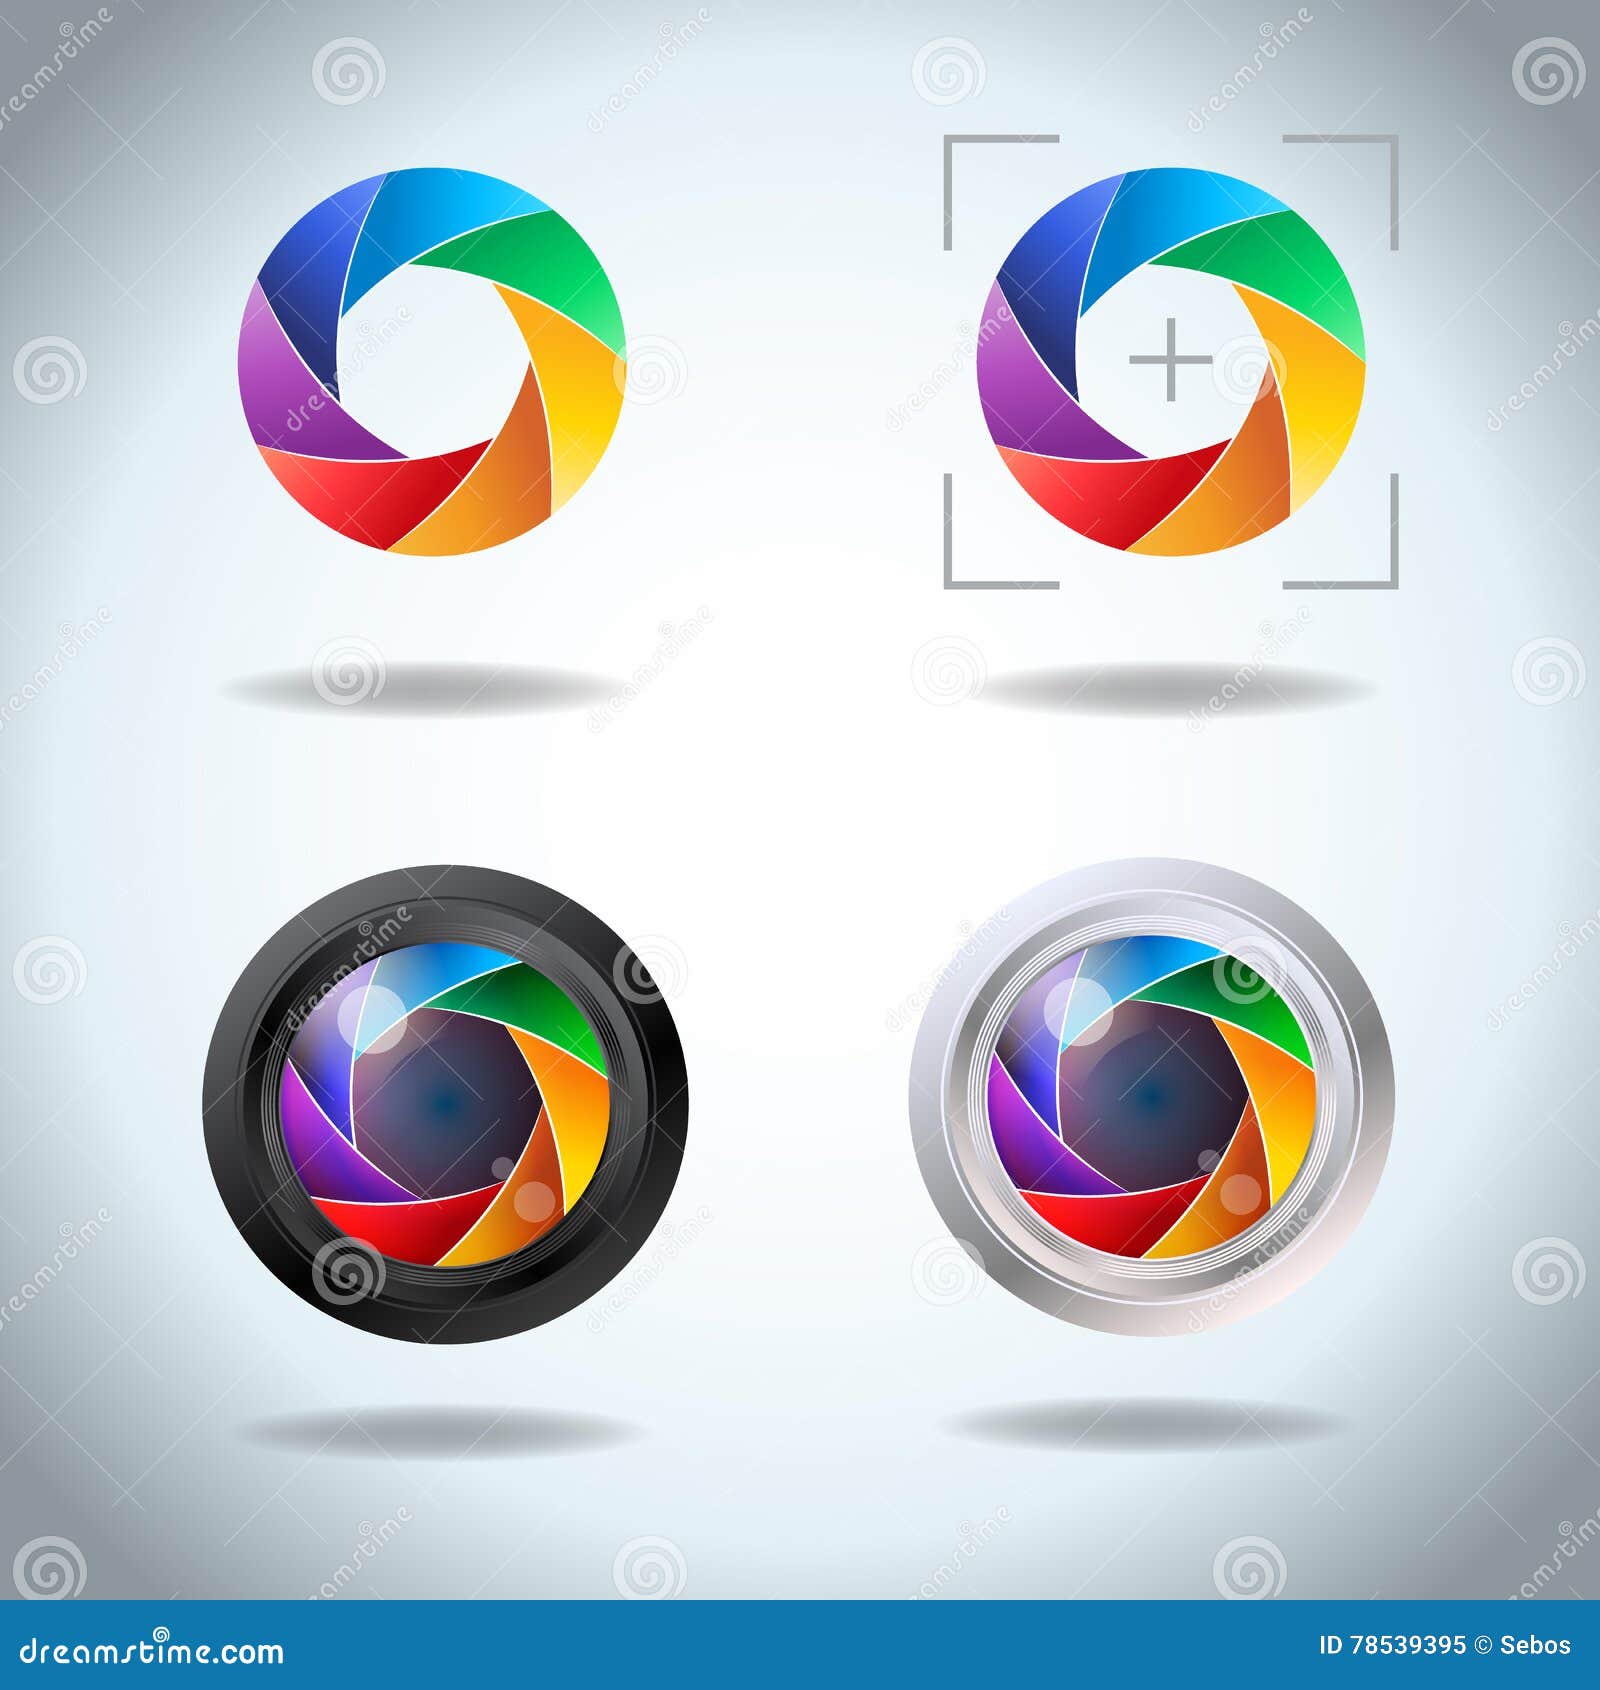 colorful  set of lens aperture. diaphragm of a photo camera shutter spectrum icon set. side exposed aperture blades